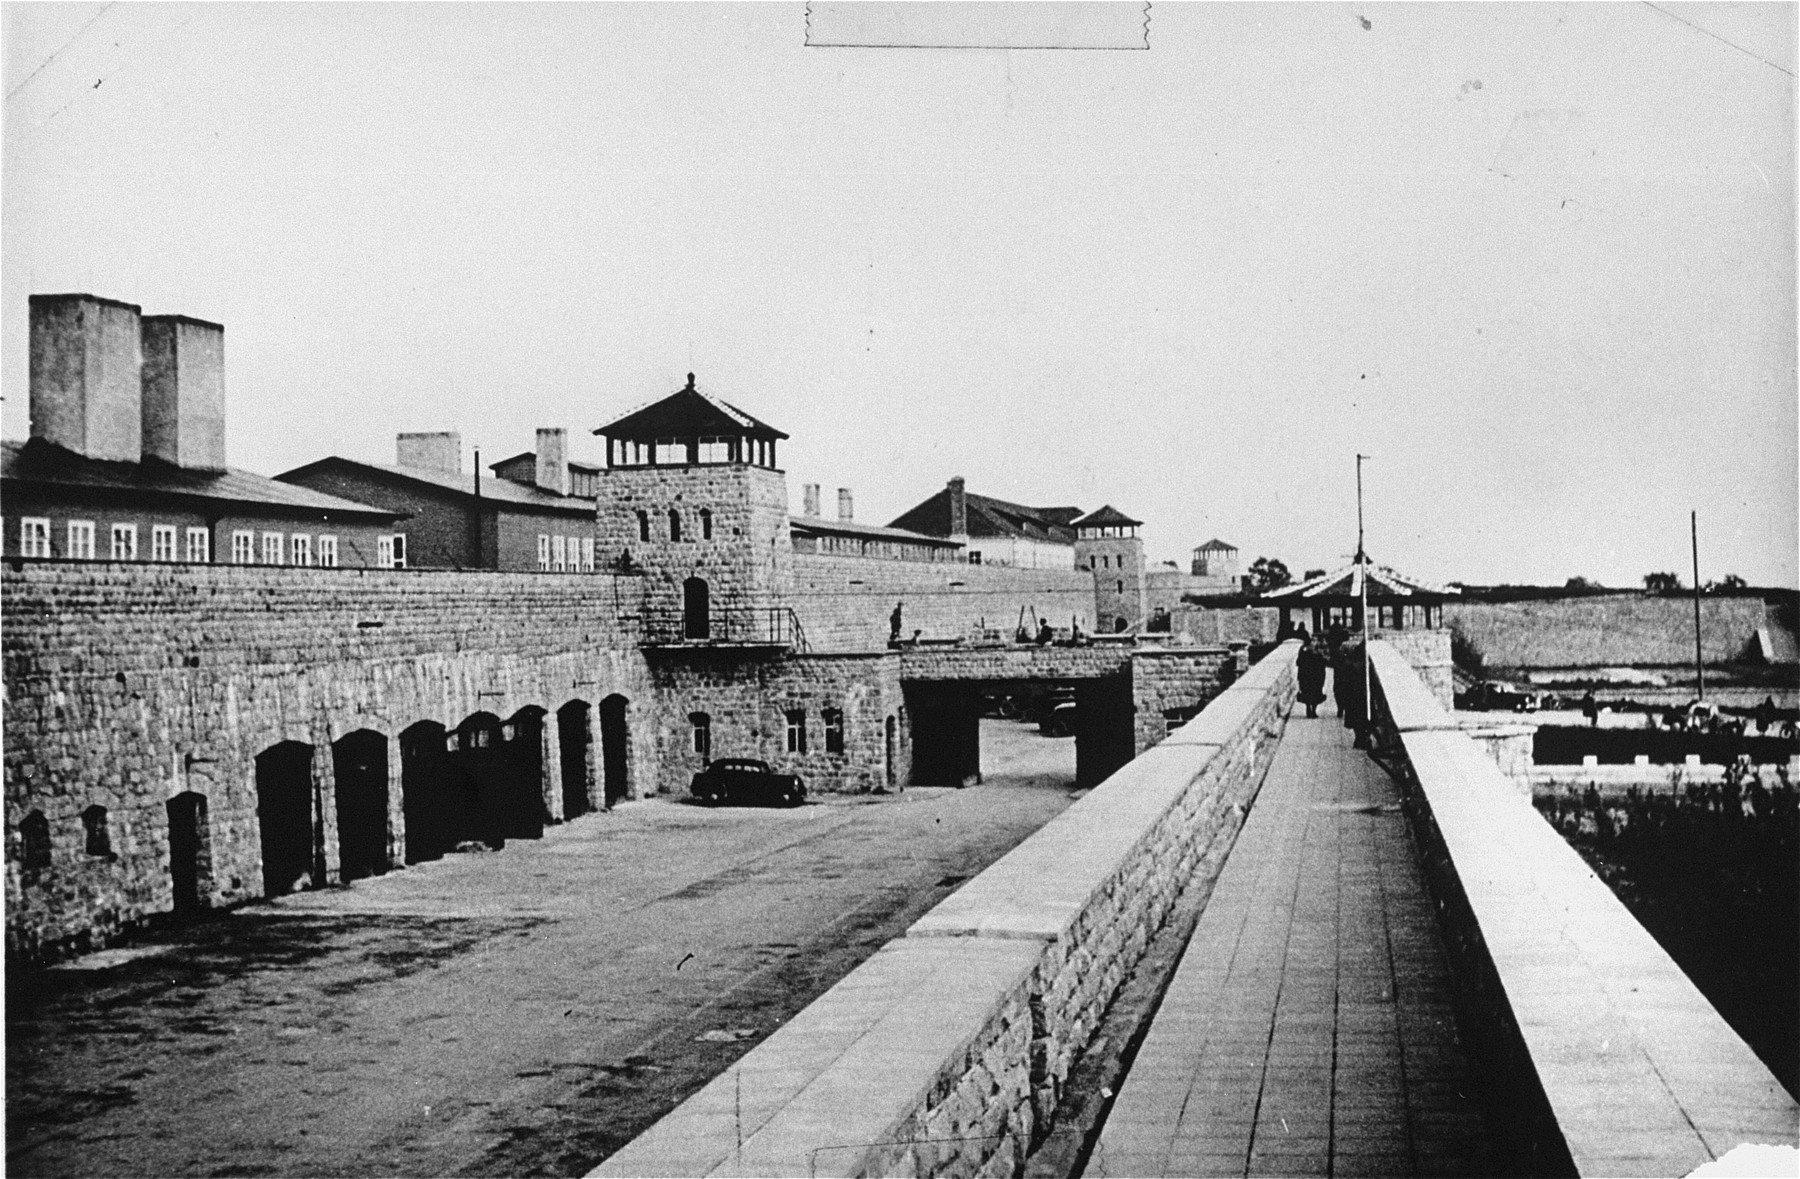 View of the Mauthausen concentration camp soon after the liberation.